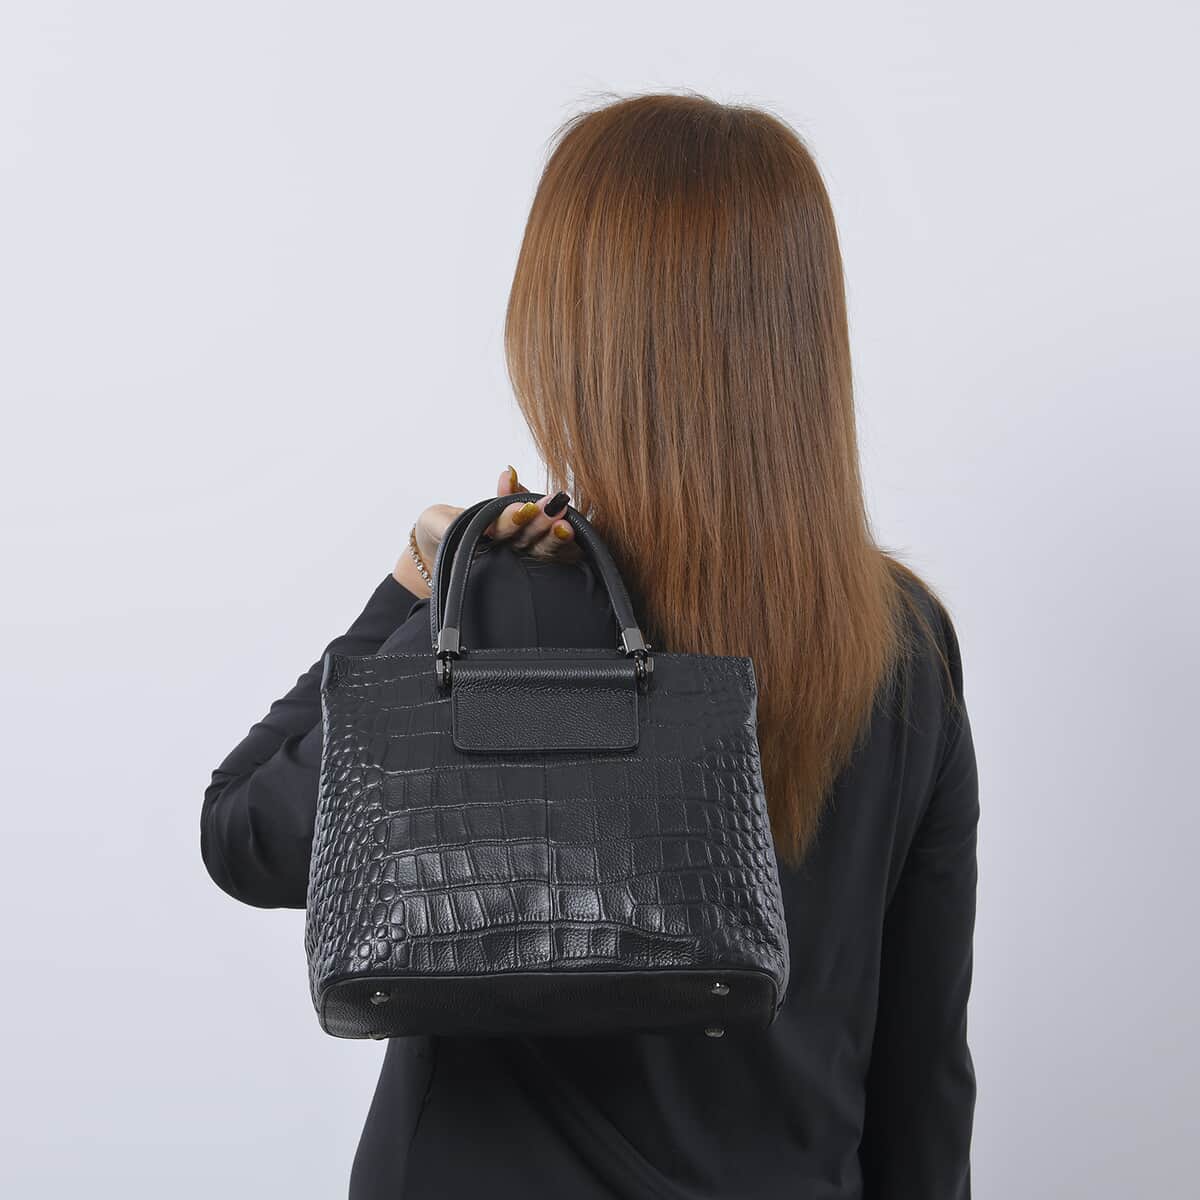 Black Crocodile Embossed Pattern Genuine Leather Convertible Bag (11.42"x4.33"x9.06") with Handle and Shoulder Straps image number 2